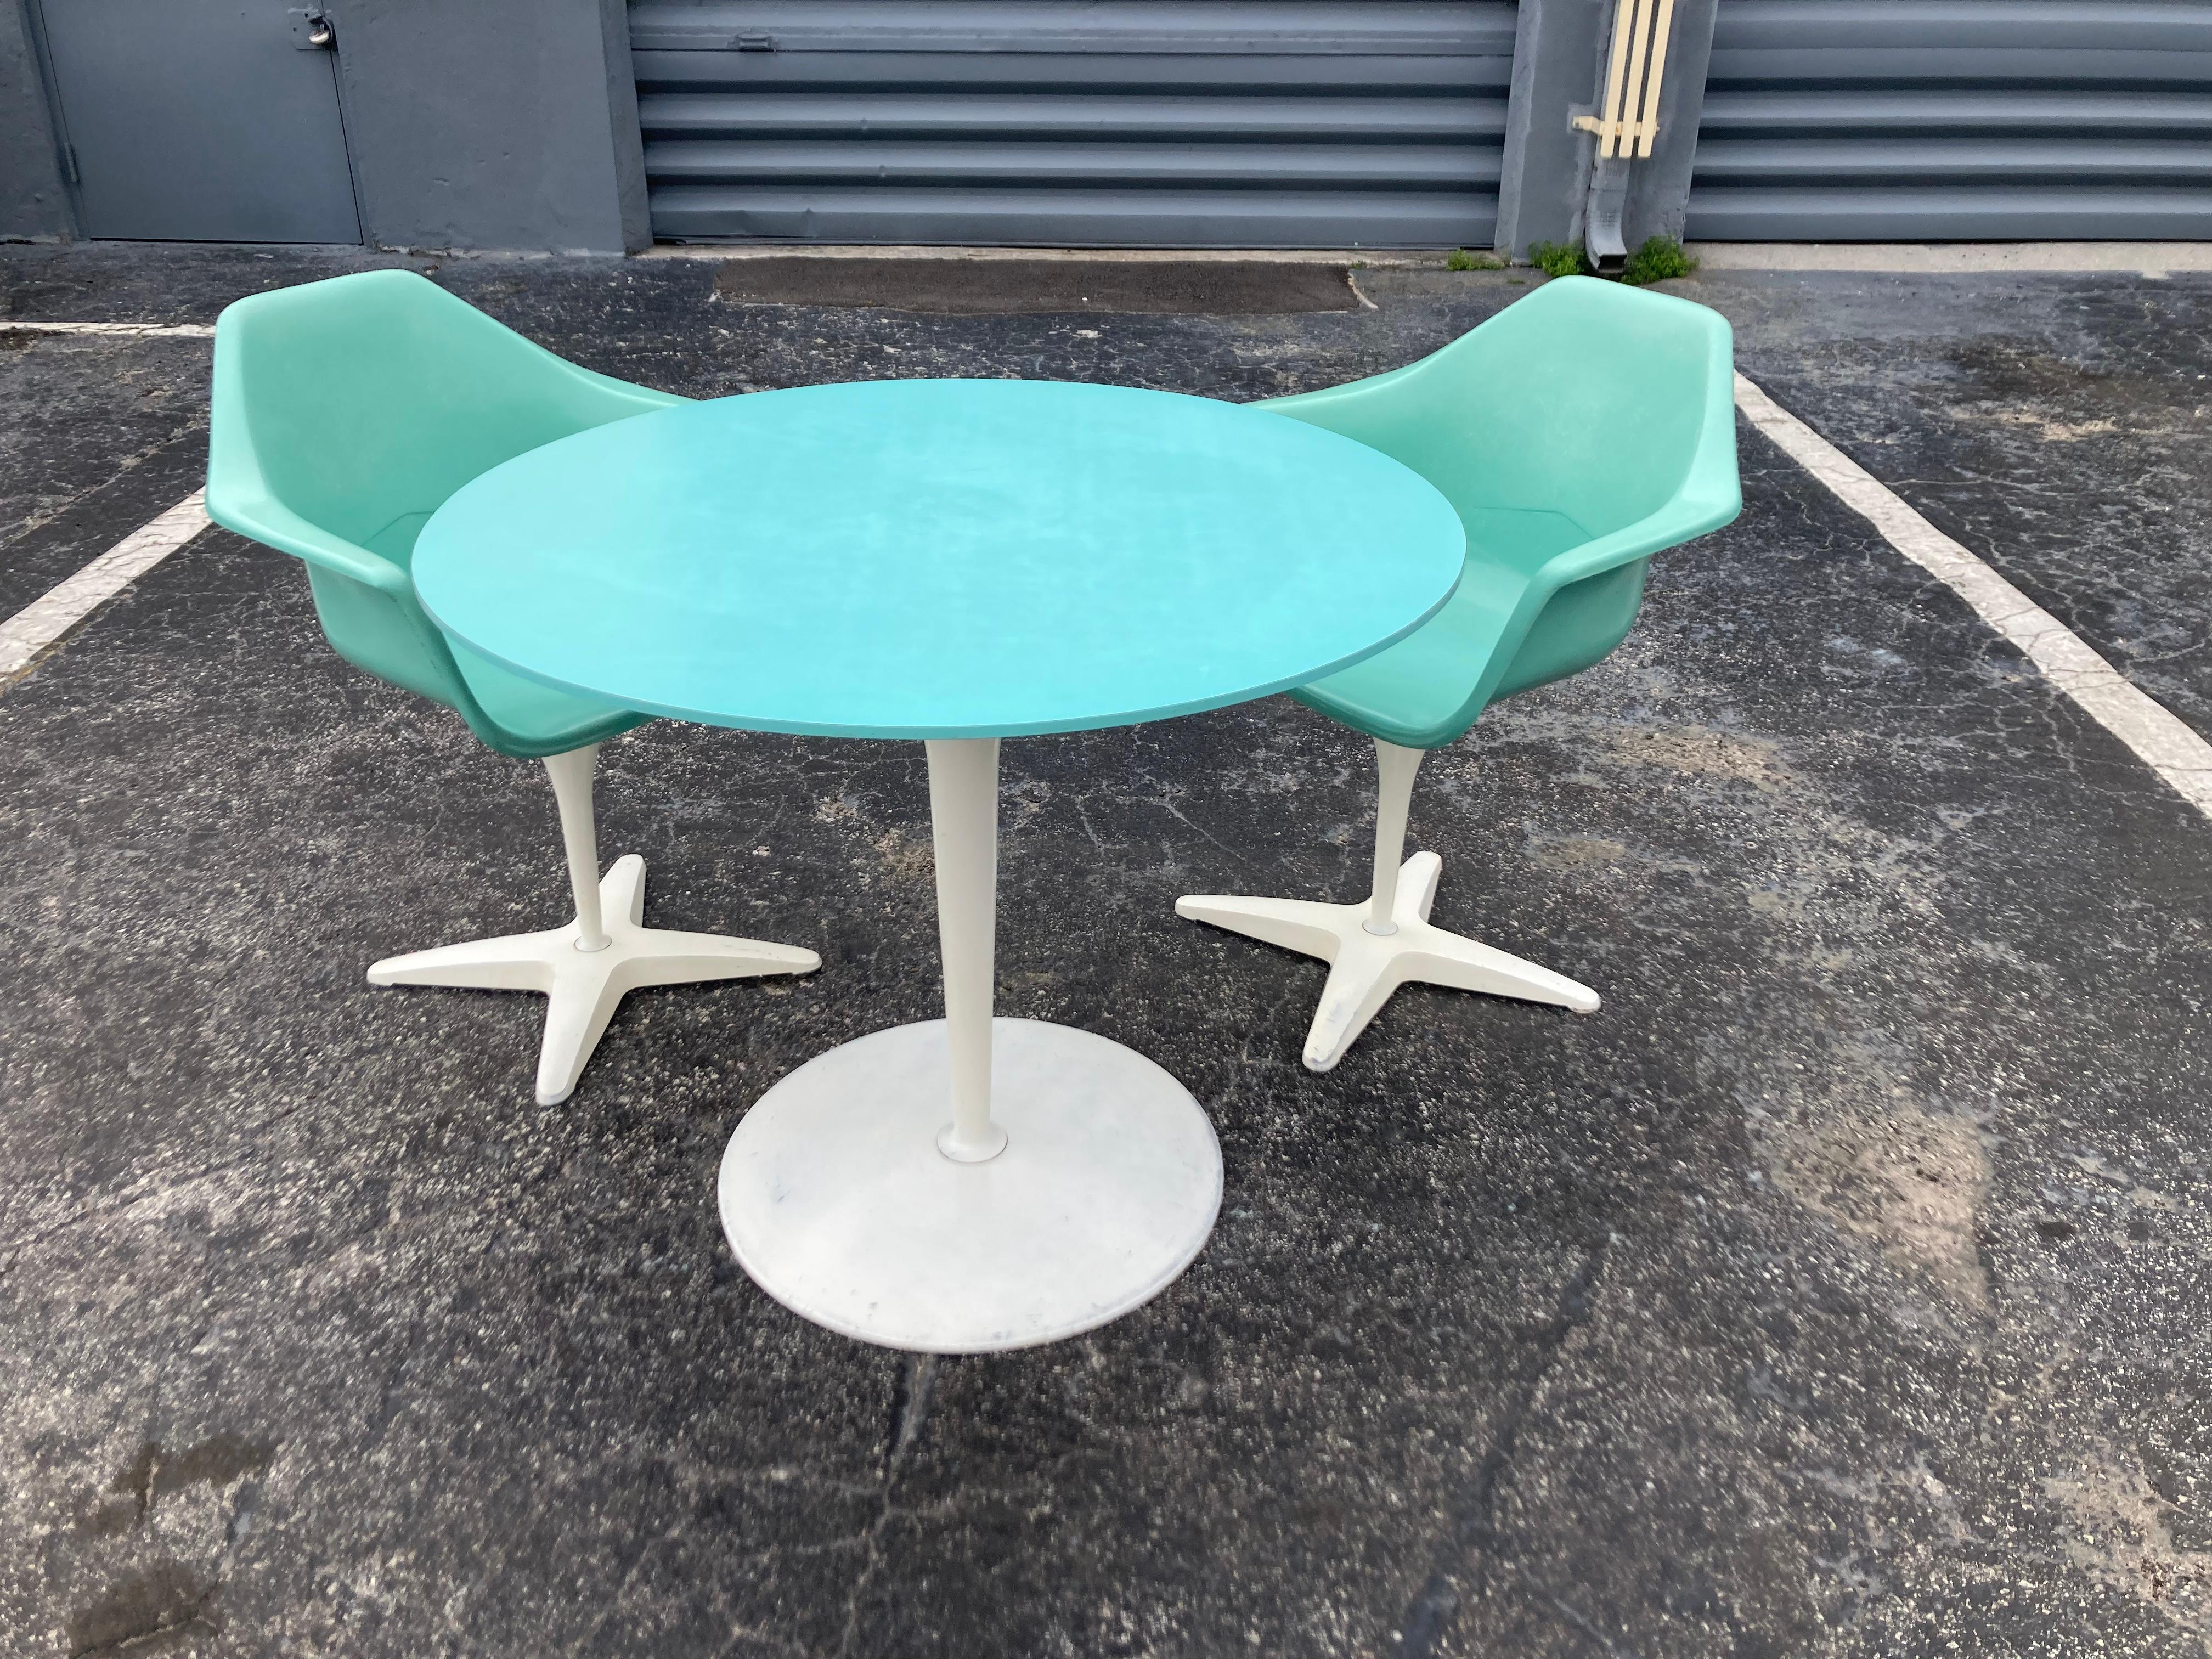 1960s Kitchen Dinette Set, Fiberglass Chairs, Turquoise, Round Table, USA For Sale 7